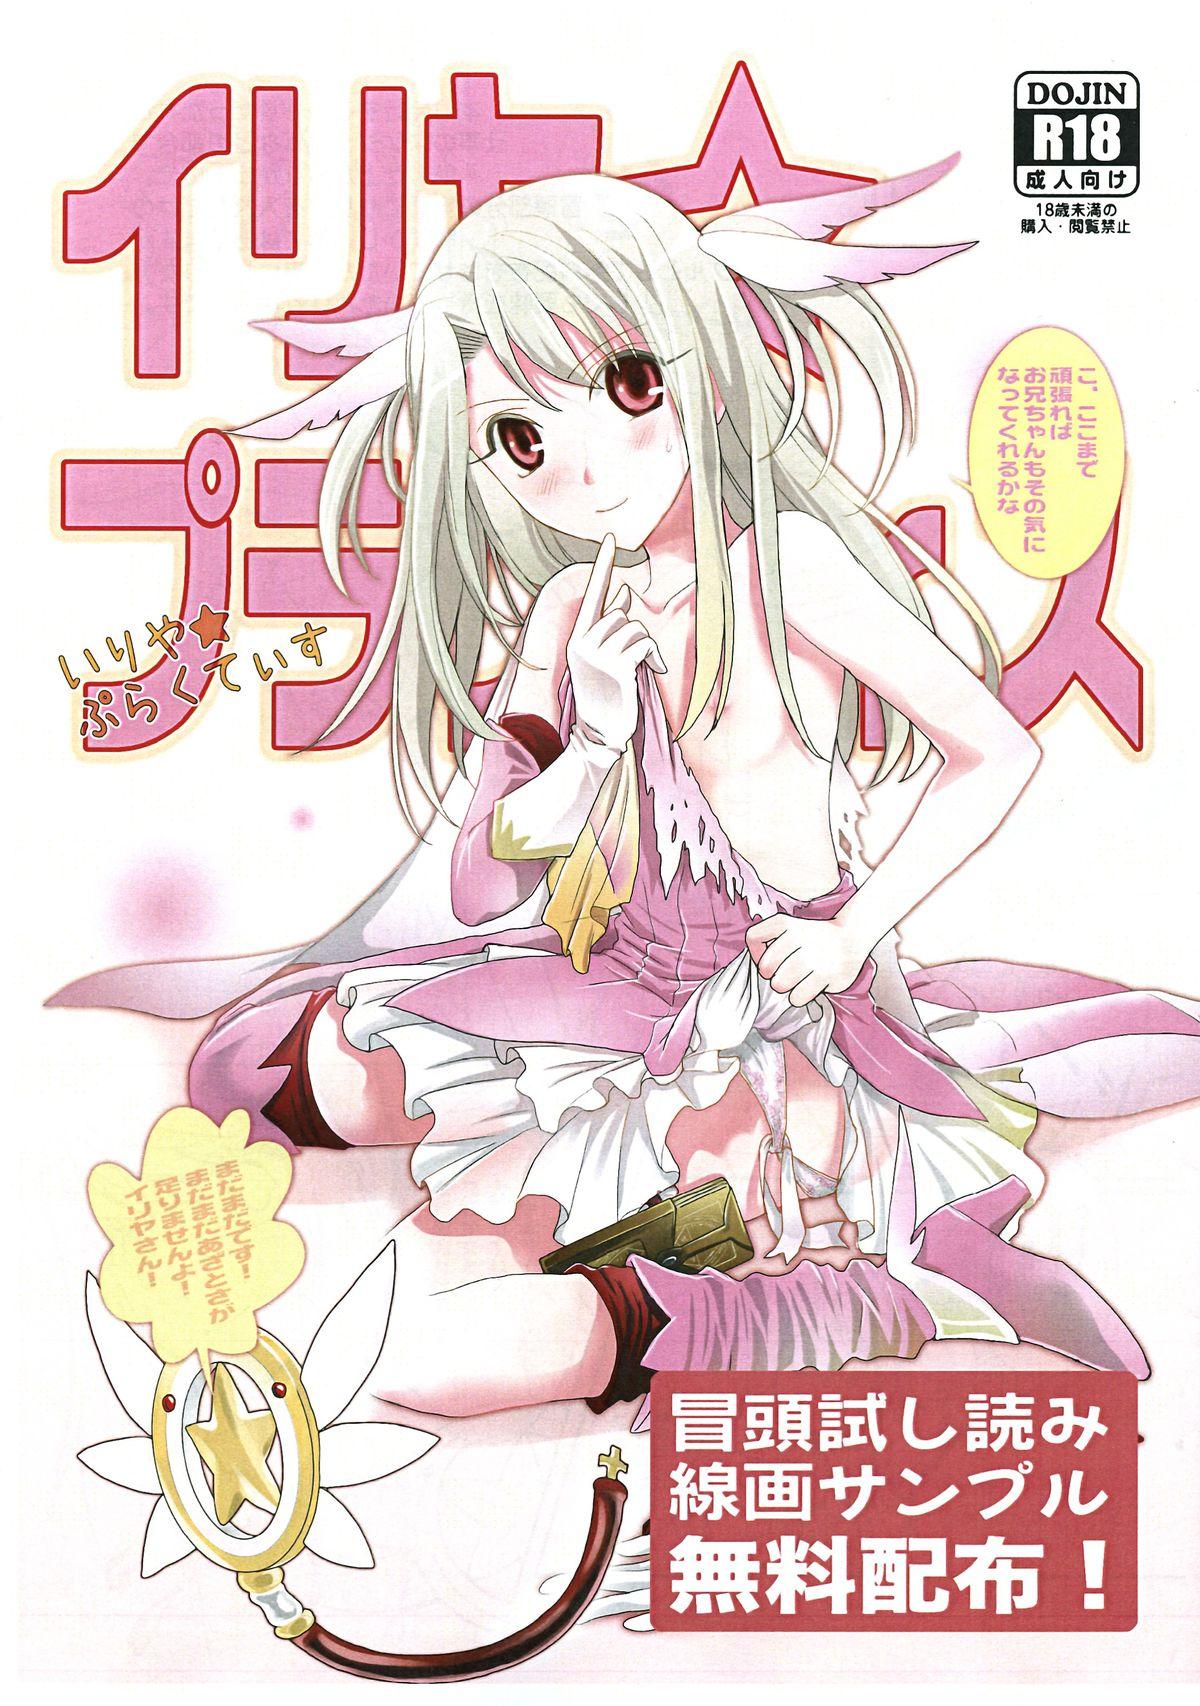 Shy Illya ☆ Practice - Fate kaleid liner prisma illya Fuck Com - Picture 1